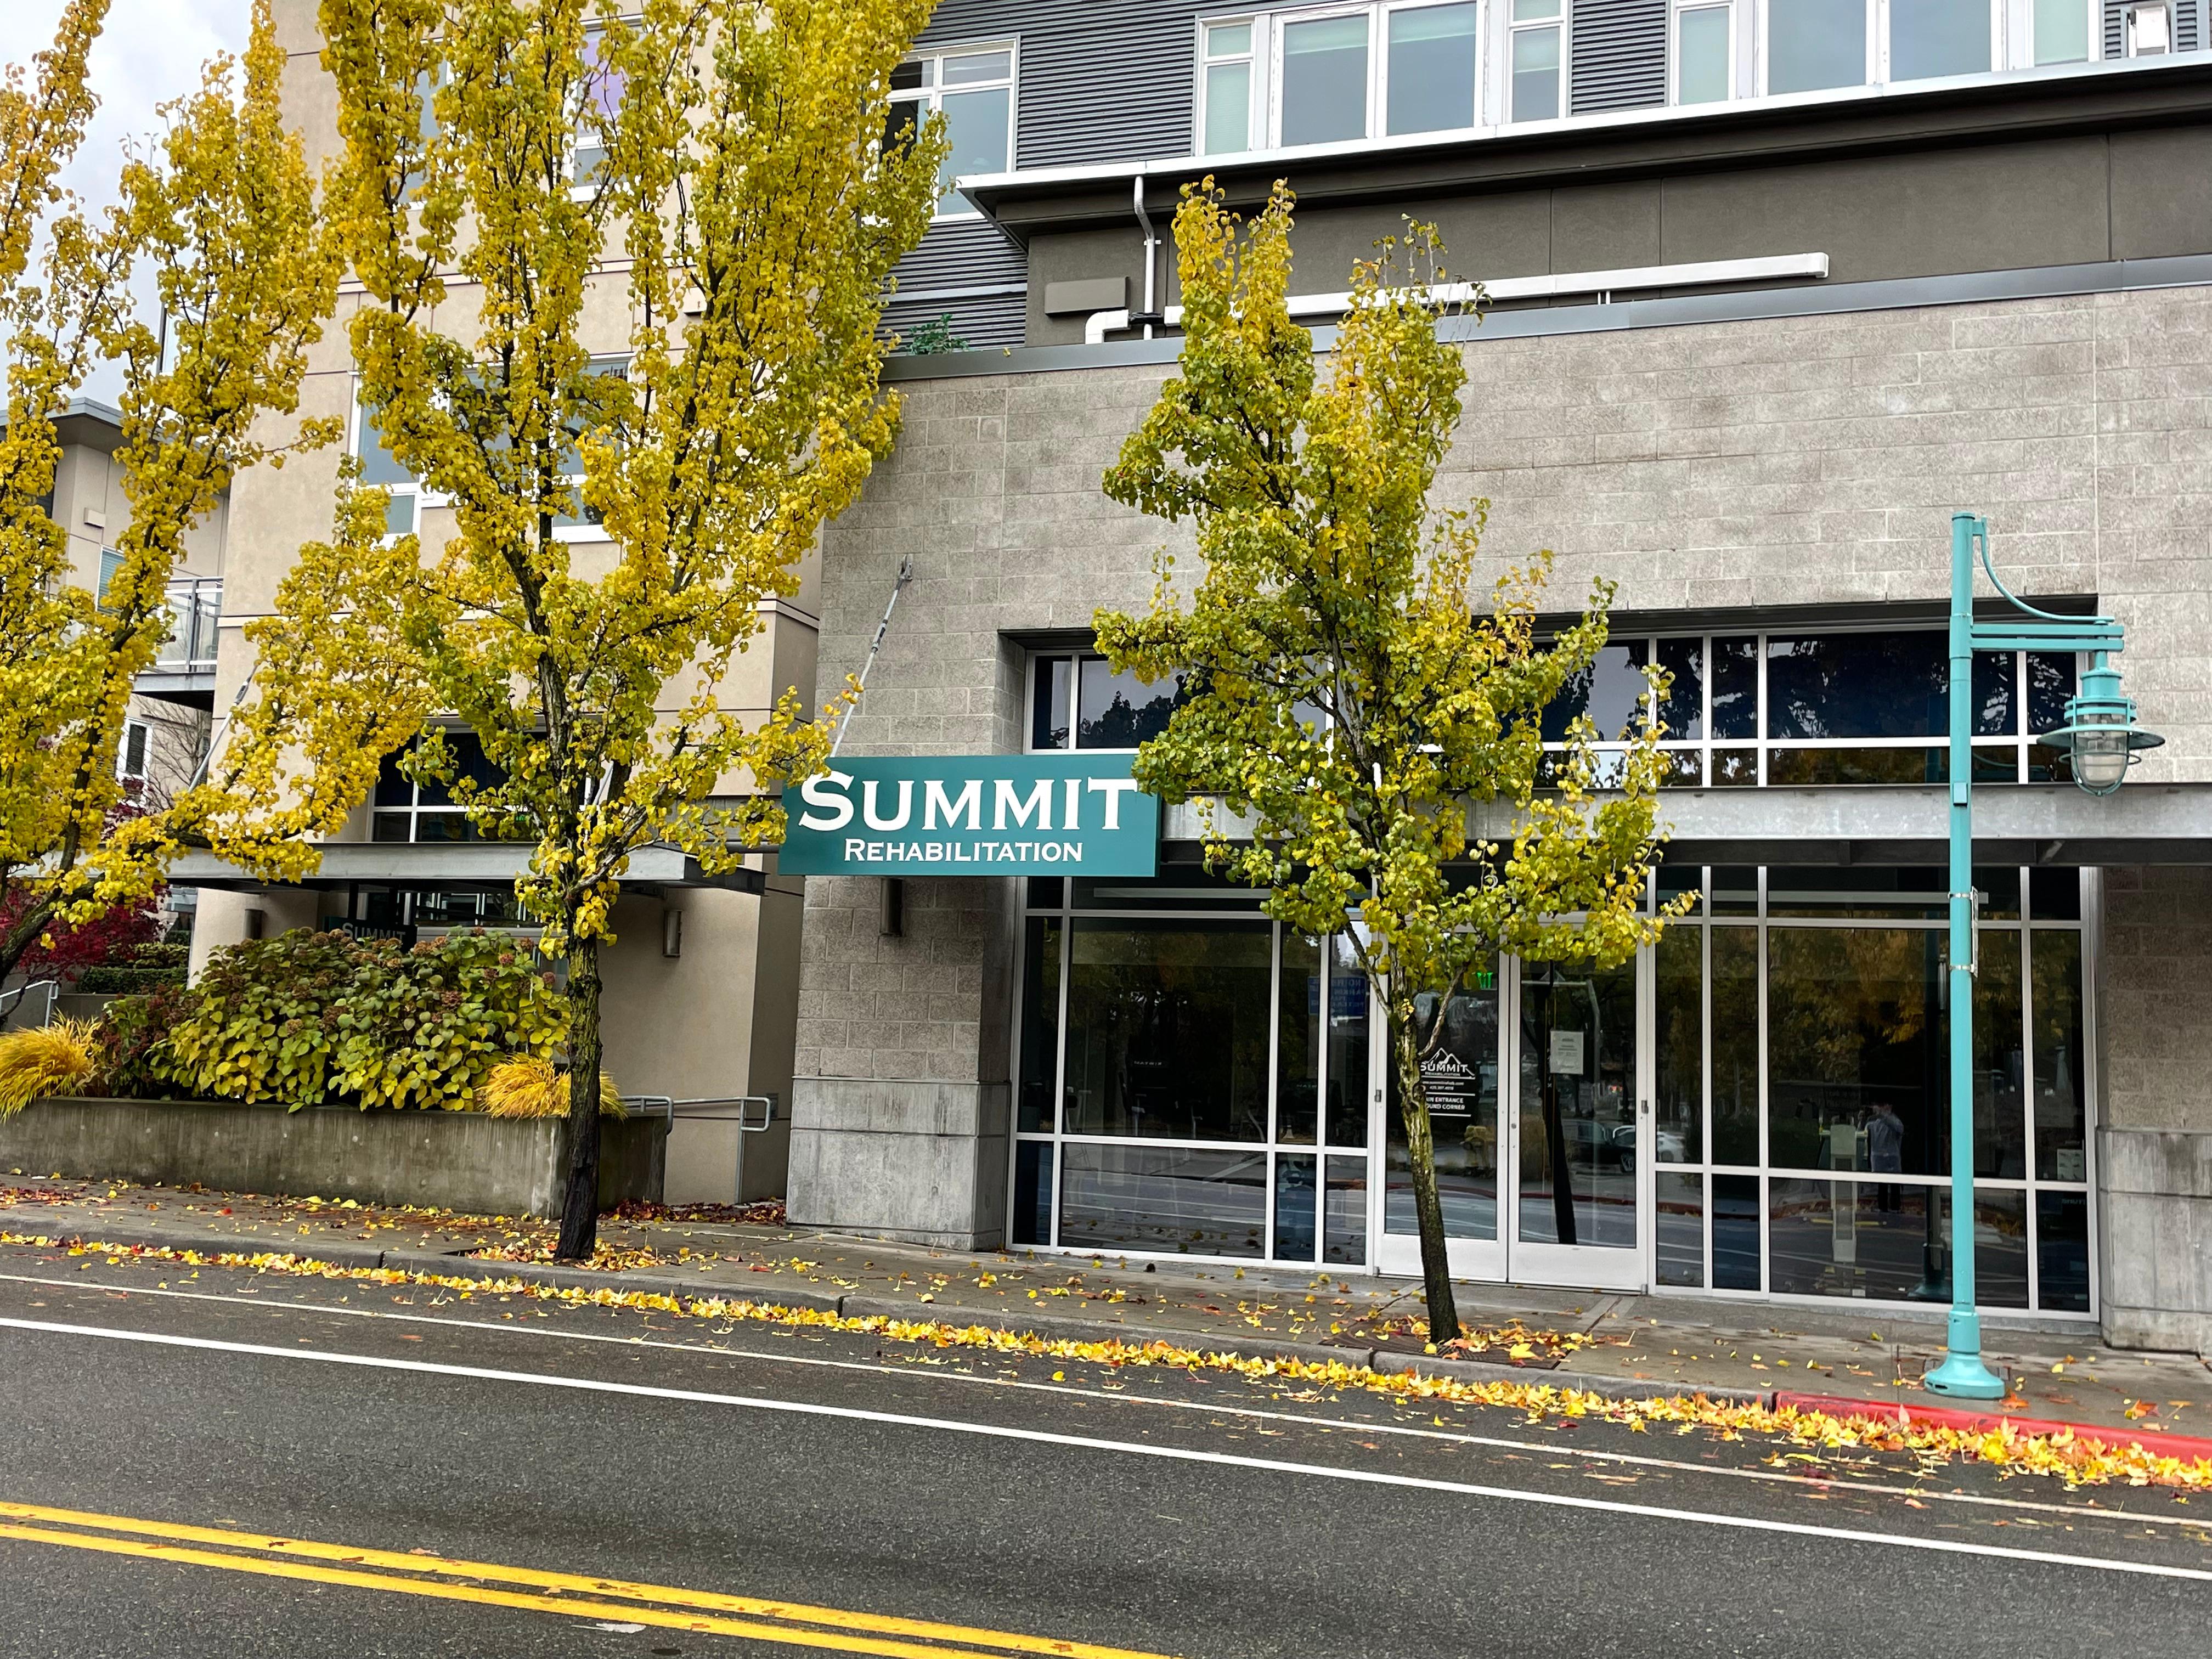 Summit Rehabilitation  physical therapy clinic at
345 Kirkland ave in
Kirkland, Washington. We welcome patients of all ages and accept most insurances.